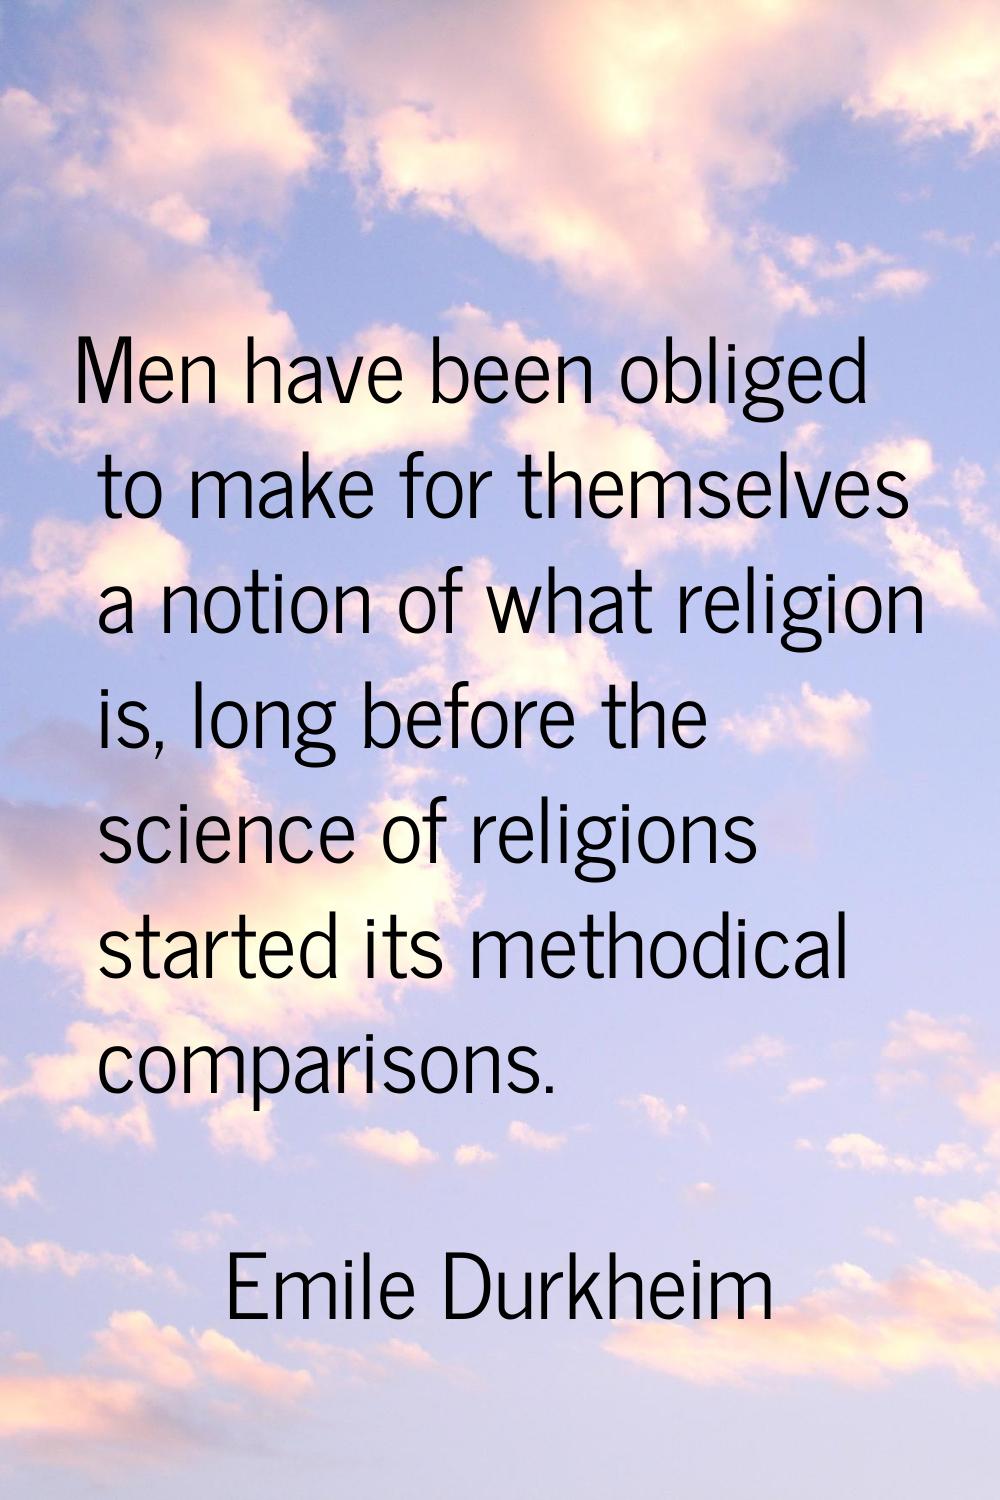 Men have been obliged to make for themselves a notion of what religion is, long before the science 